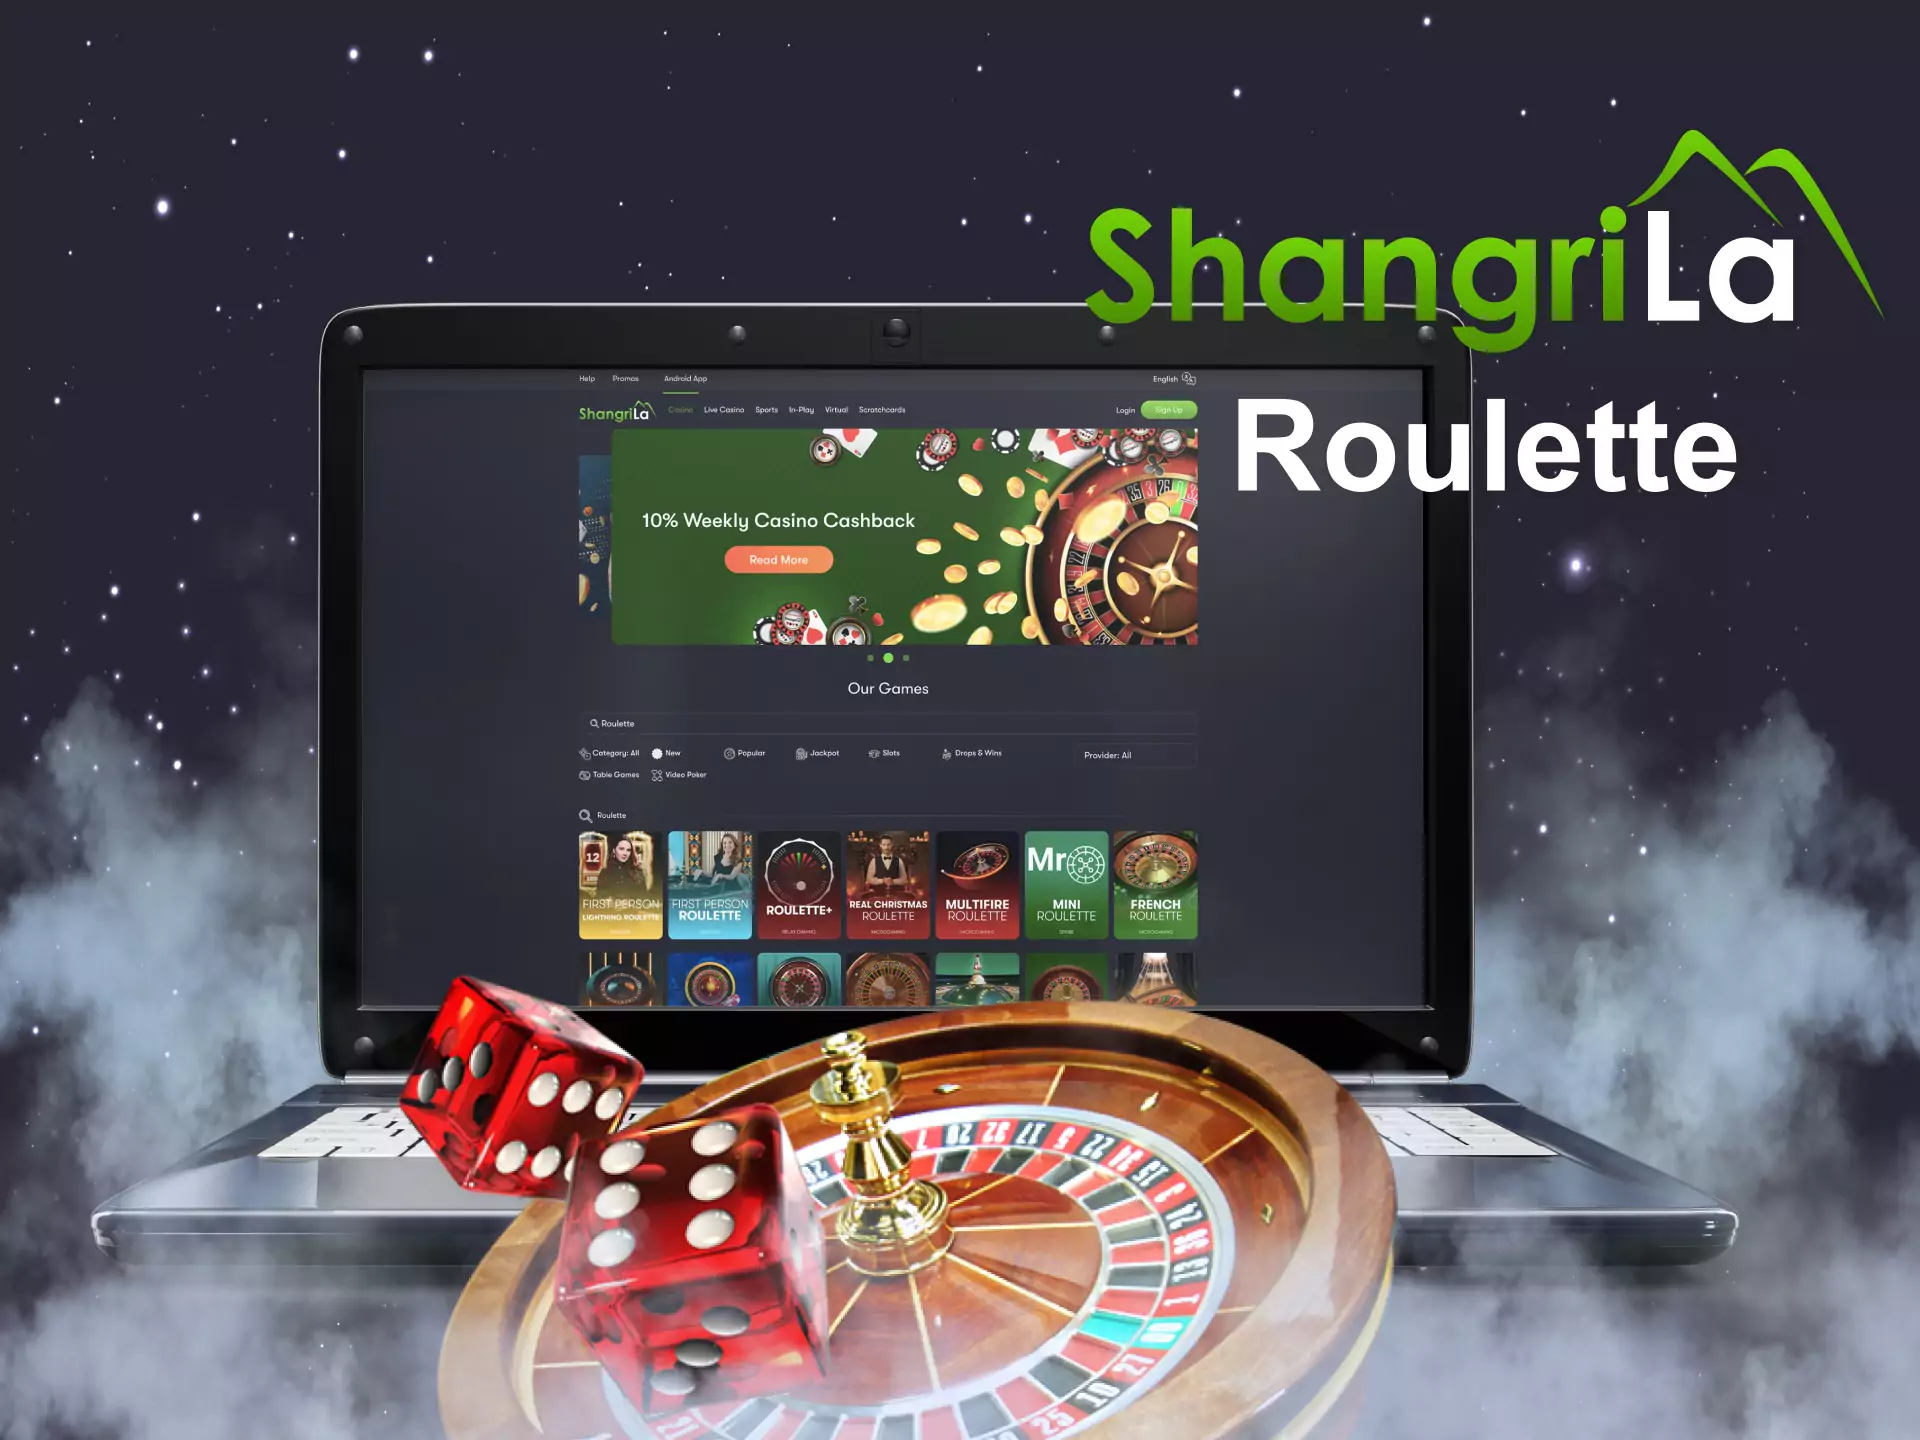 In the Shangri La Casino, you can play different types of roulettes.